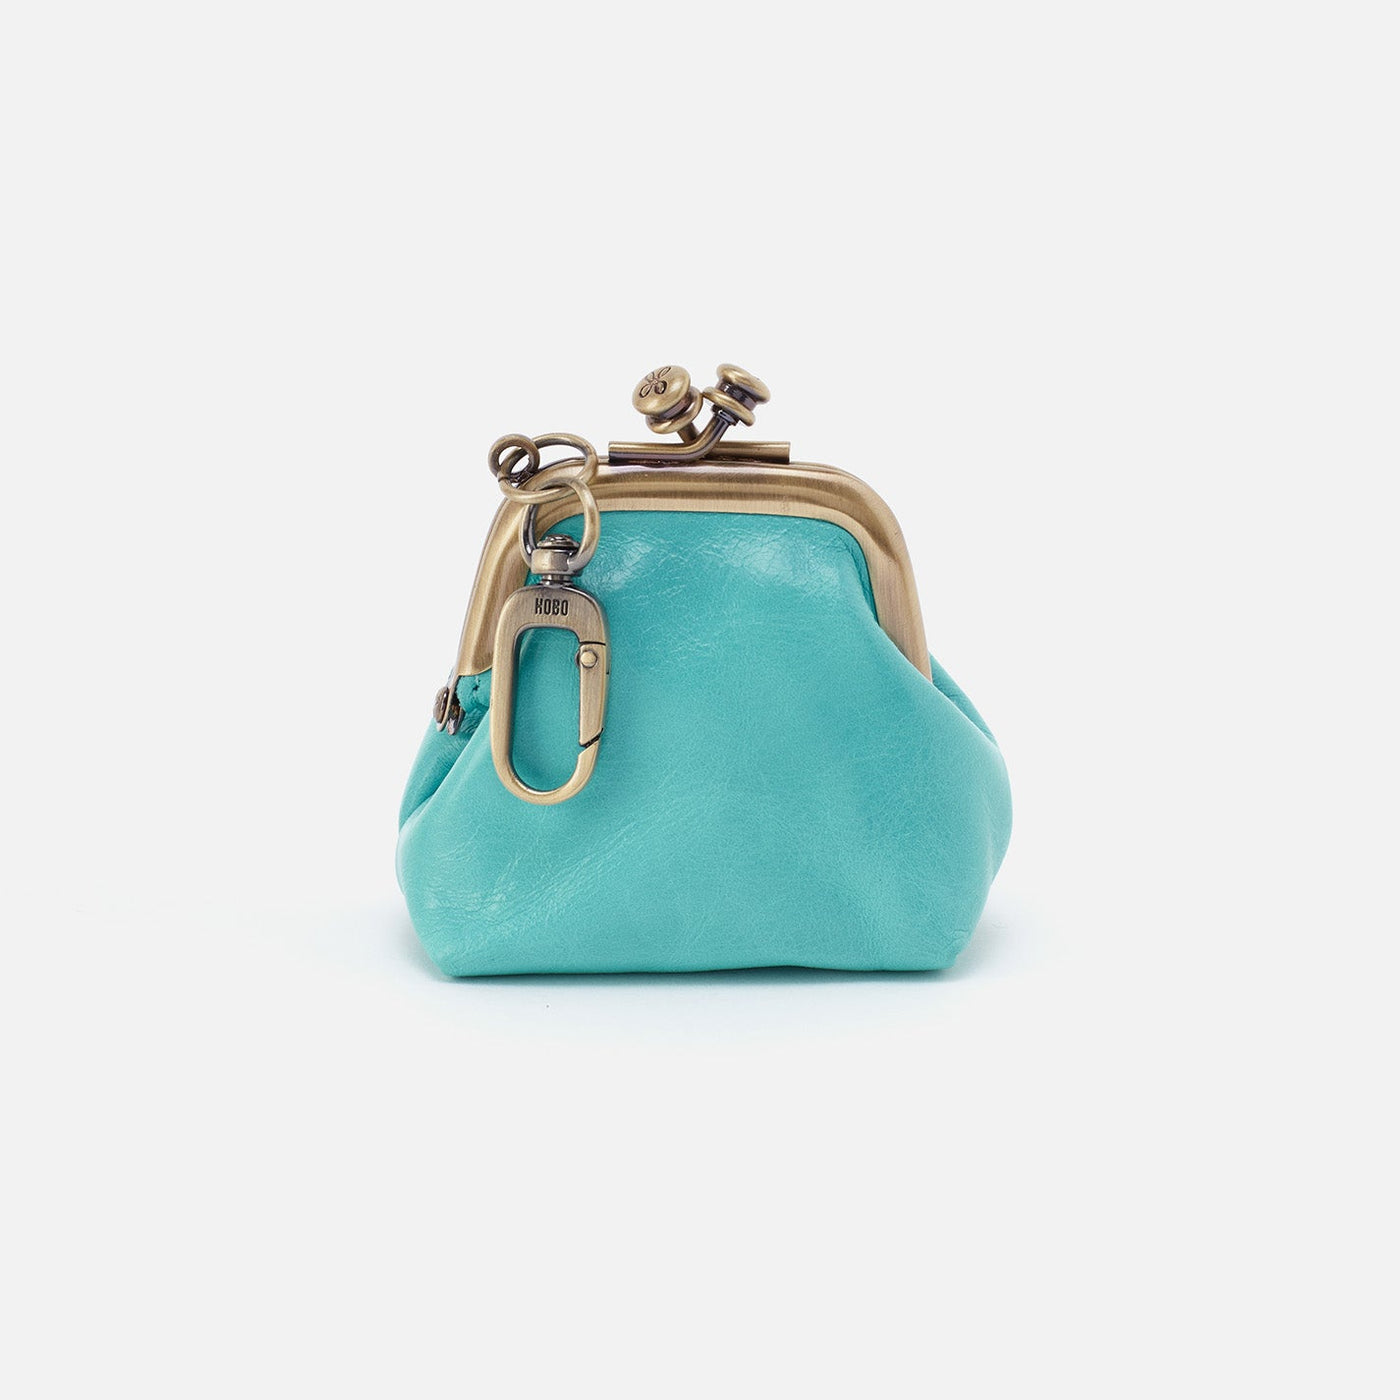 Run Frame Pouch in Polished Leather - Light Aqua